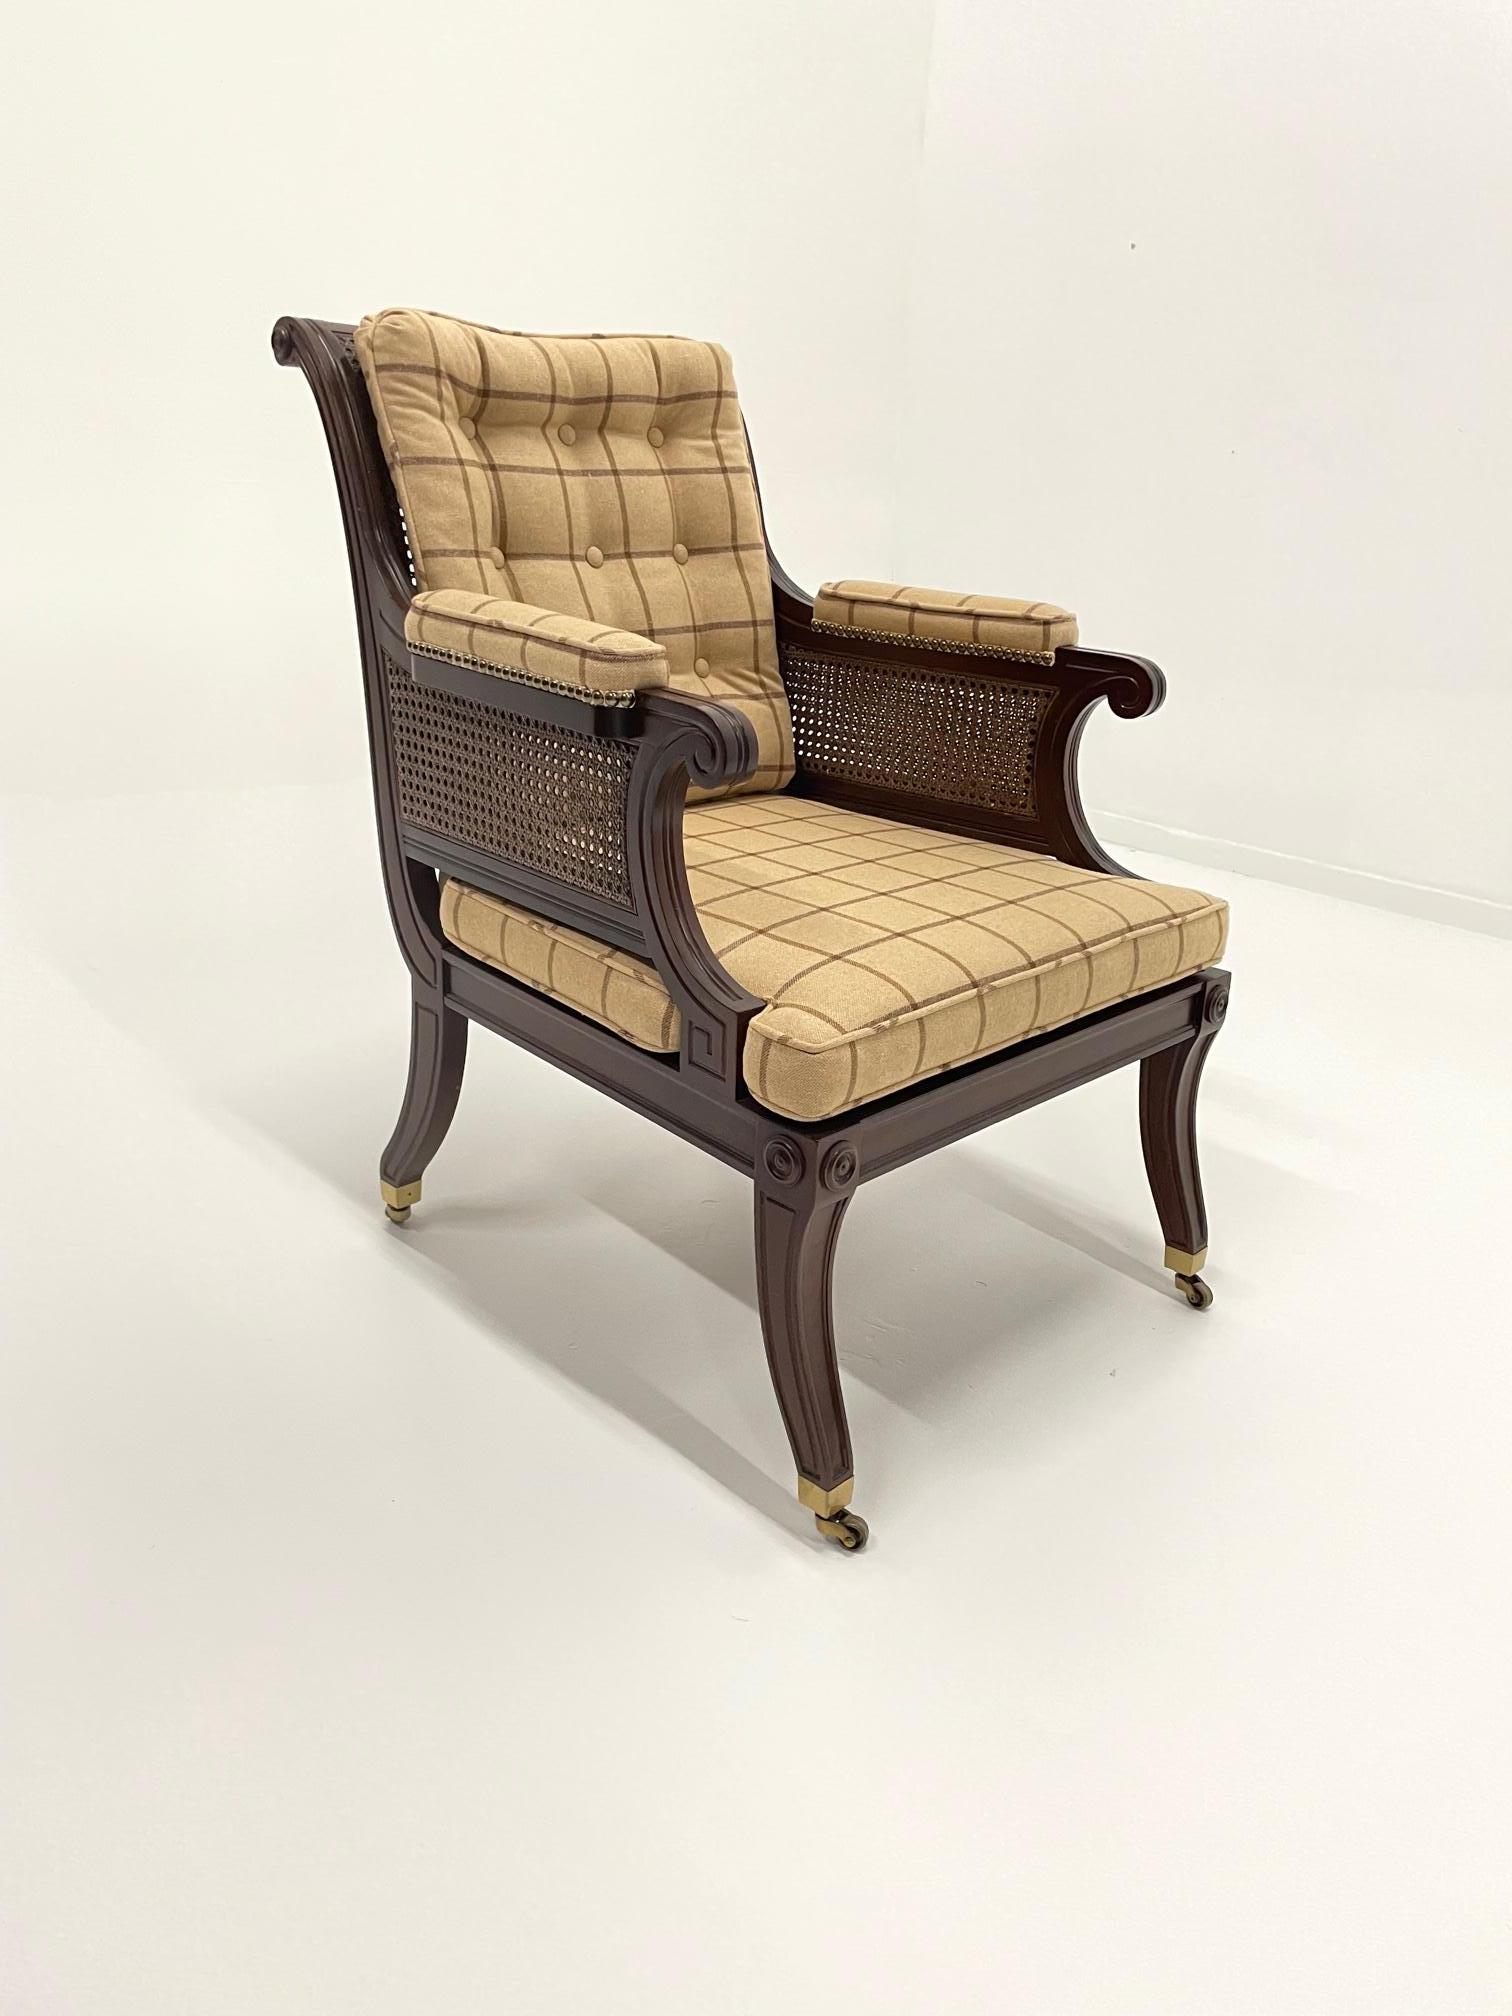 Handsome mahogany club chair by Baker having caned back with buttons and stylish wool suiting fabric camel plaid upholstery. Great details like caning on the arms and upholstered arm rests, curved legs that terminate in brass casters.
arm height